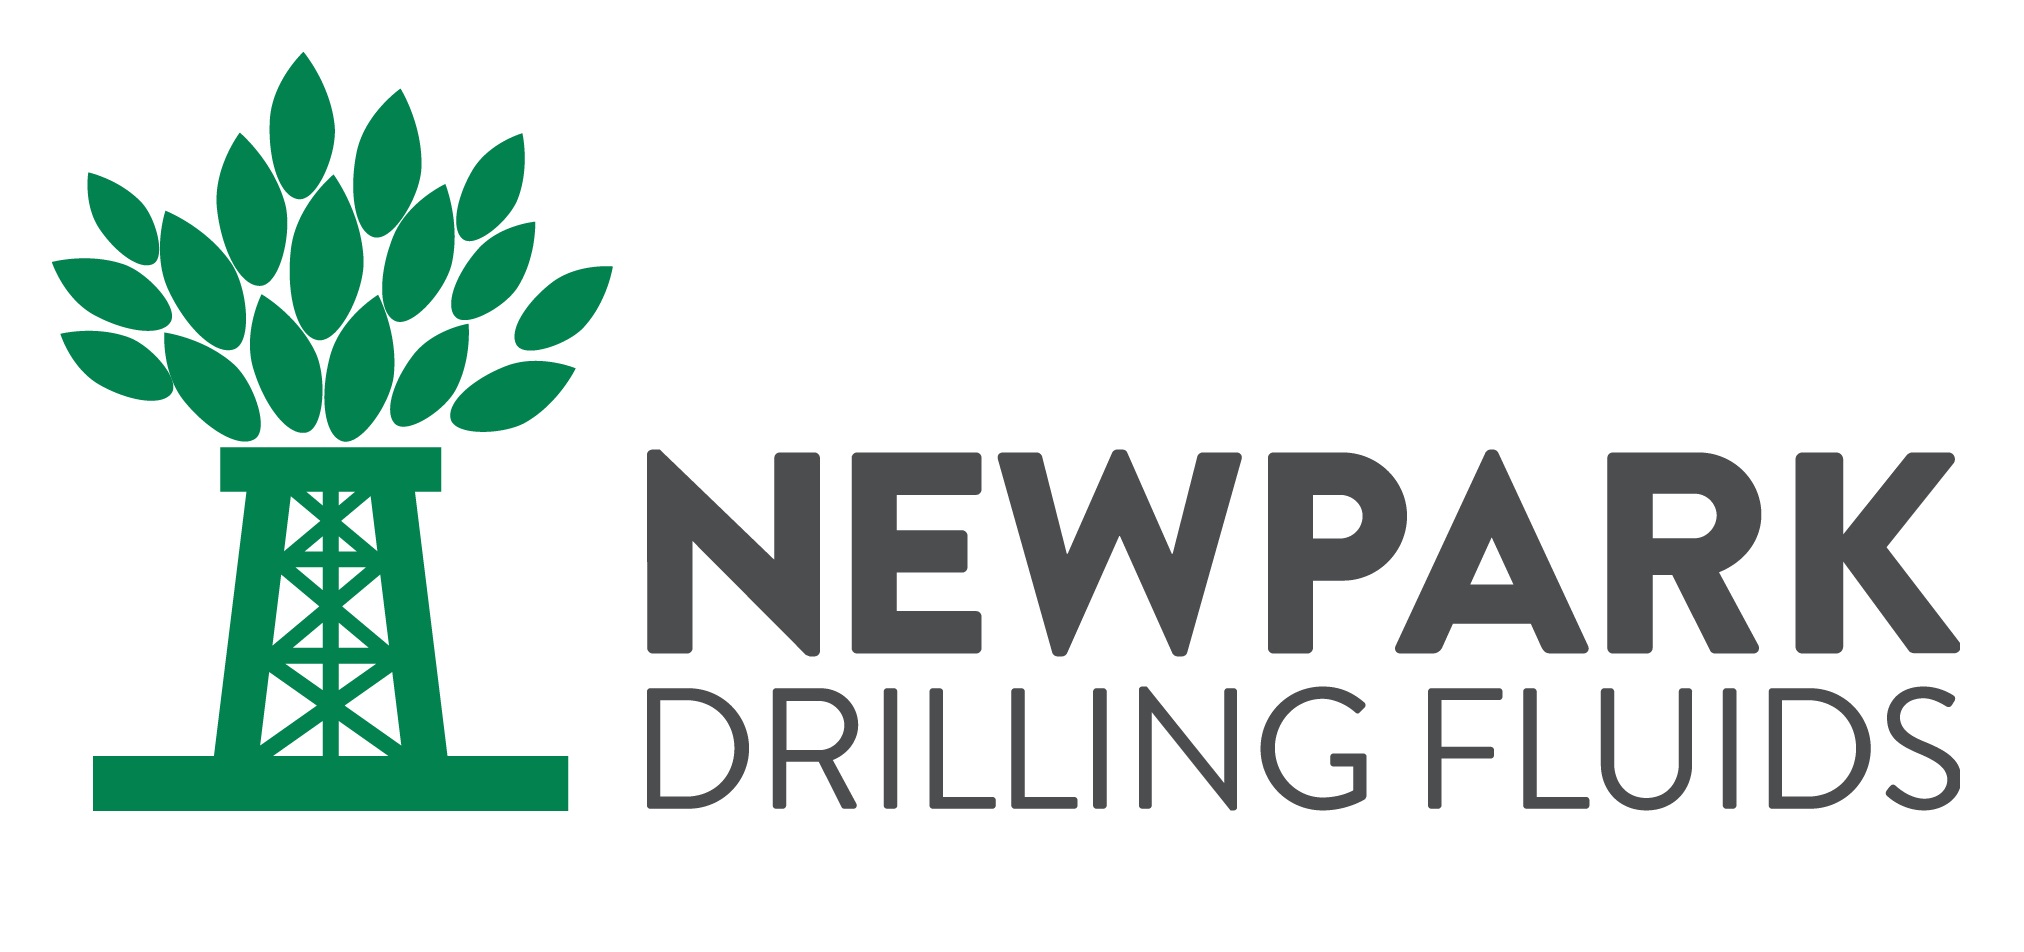 Focus on Drilling Fluids Proves to Be a Key to Cutting Costs and Driving Efficiency